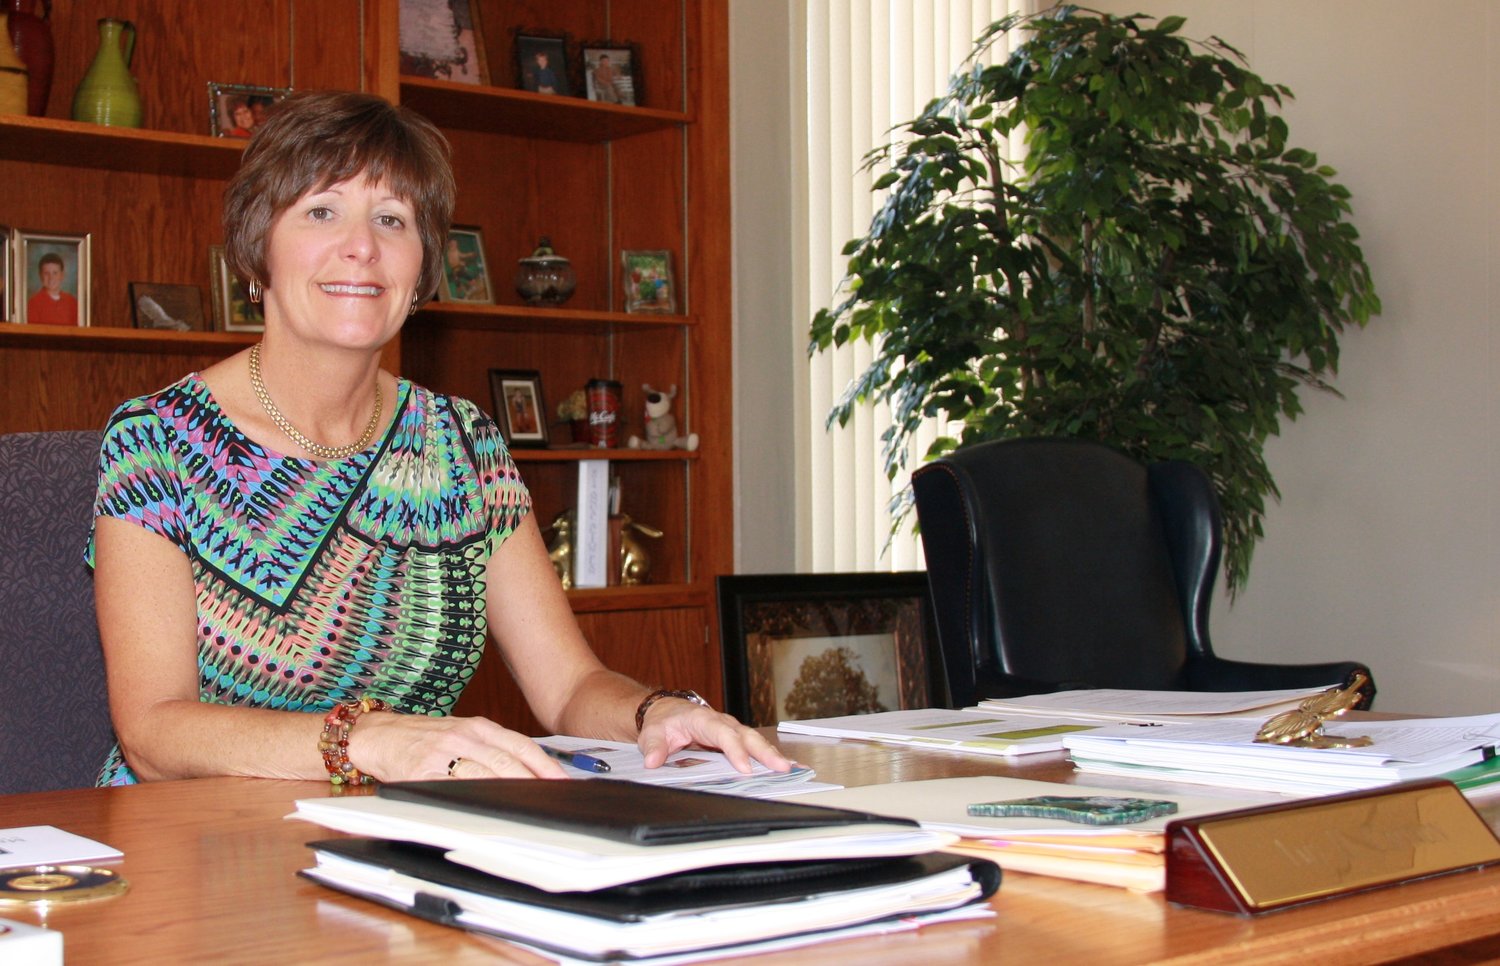 Cumberland County Manager Amy Cannon will retire effective Dec. 1, according to a county news release.